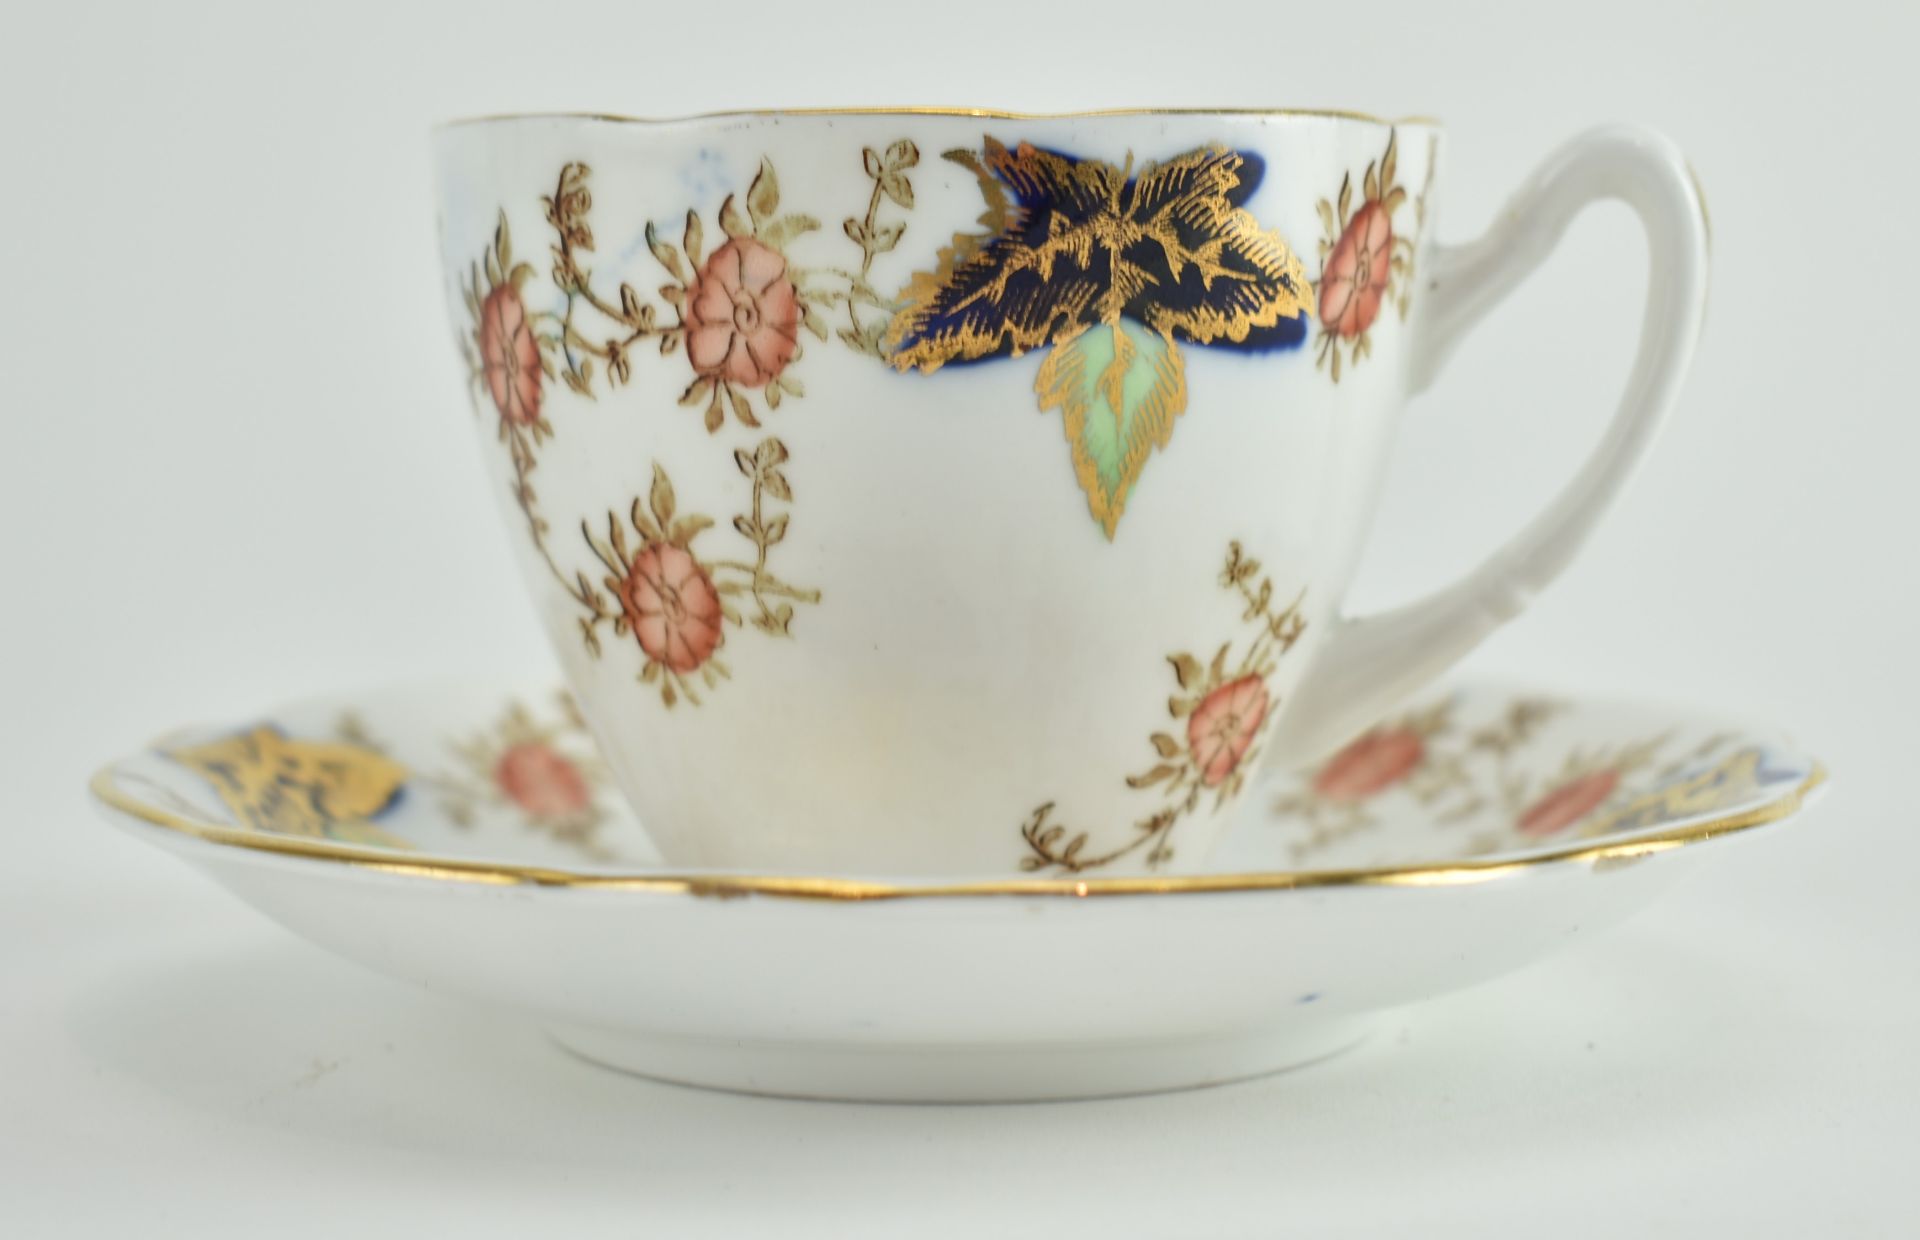 SIX VINTAGE ENGLISH BONE CHINA CUPS AND SAUCERS SETS AND A JUG - Image 6 of 10